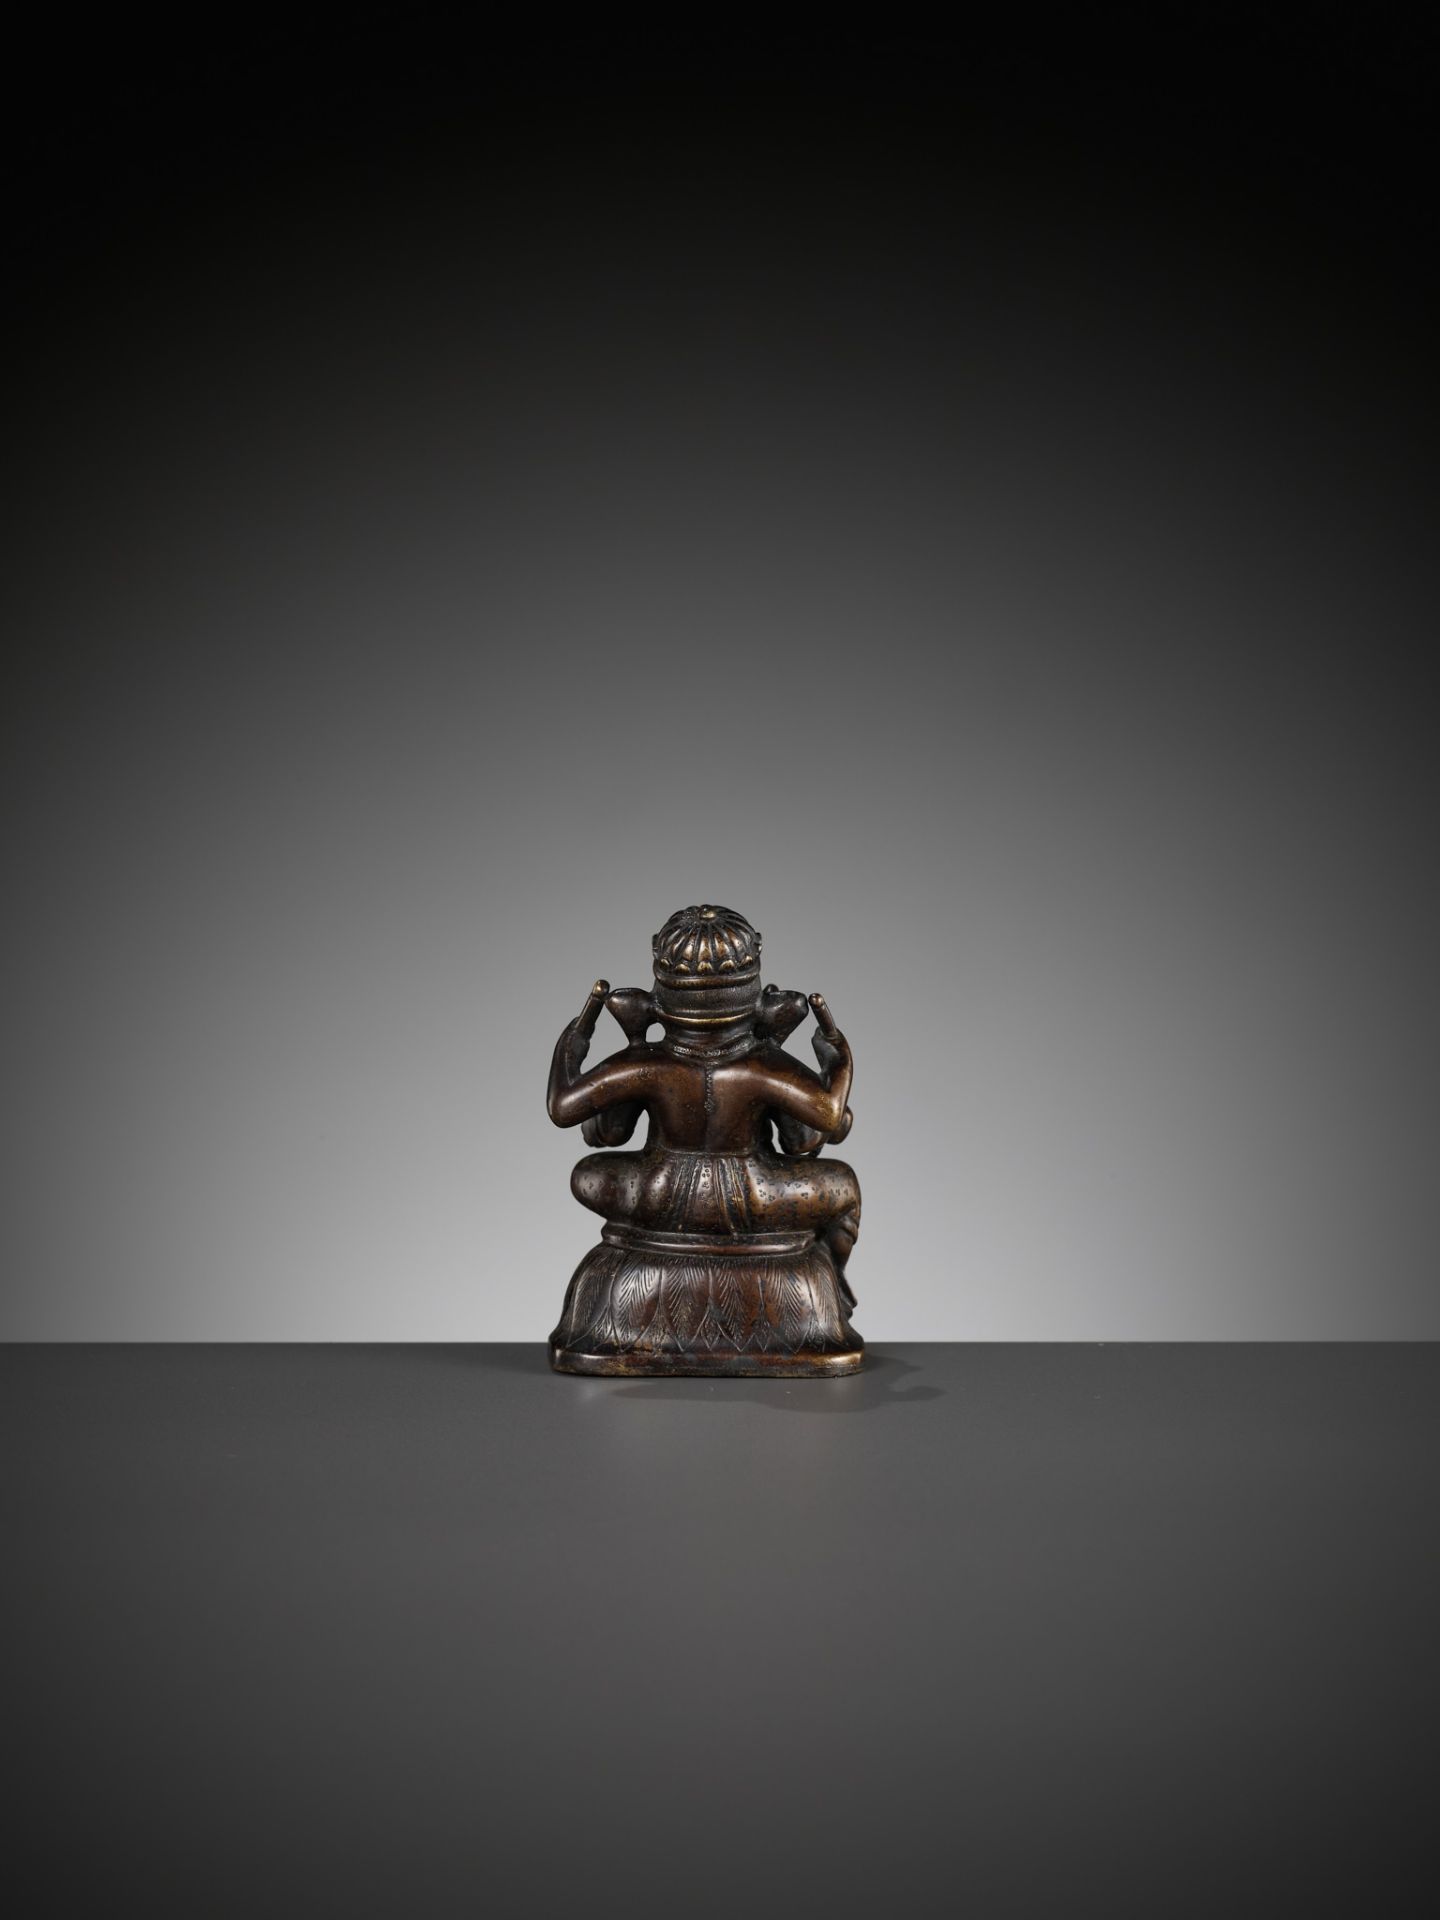 A SMALL BRONZE FIGURE OF GANESHA, SOUTH INDIA, 17TH - 18TH CENTURY - Image 10 of 14